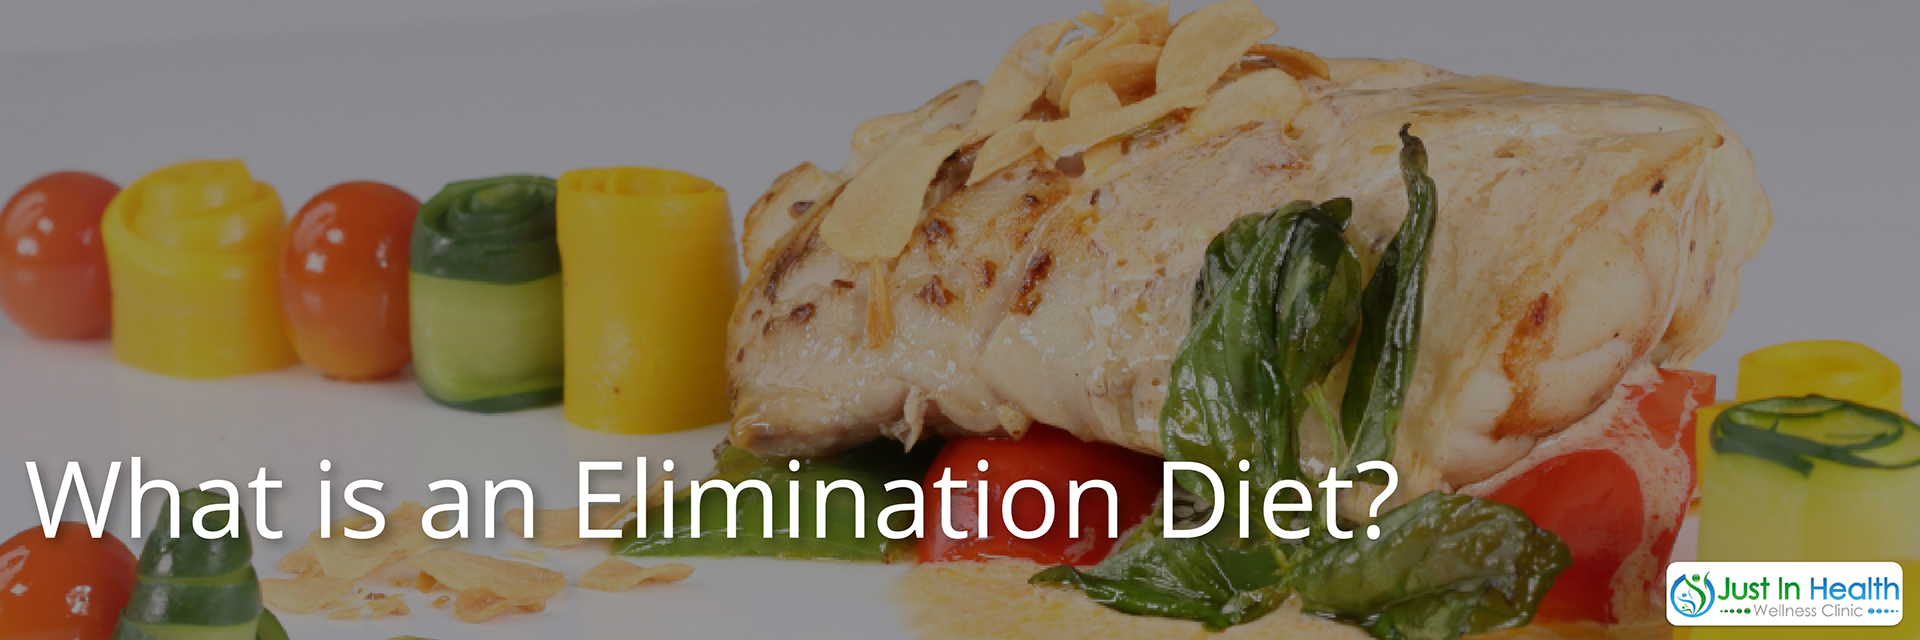 What is an Elimination Diet?